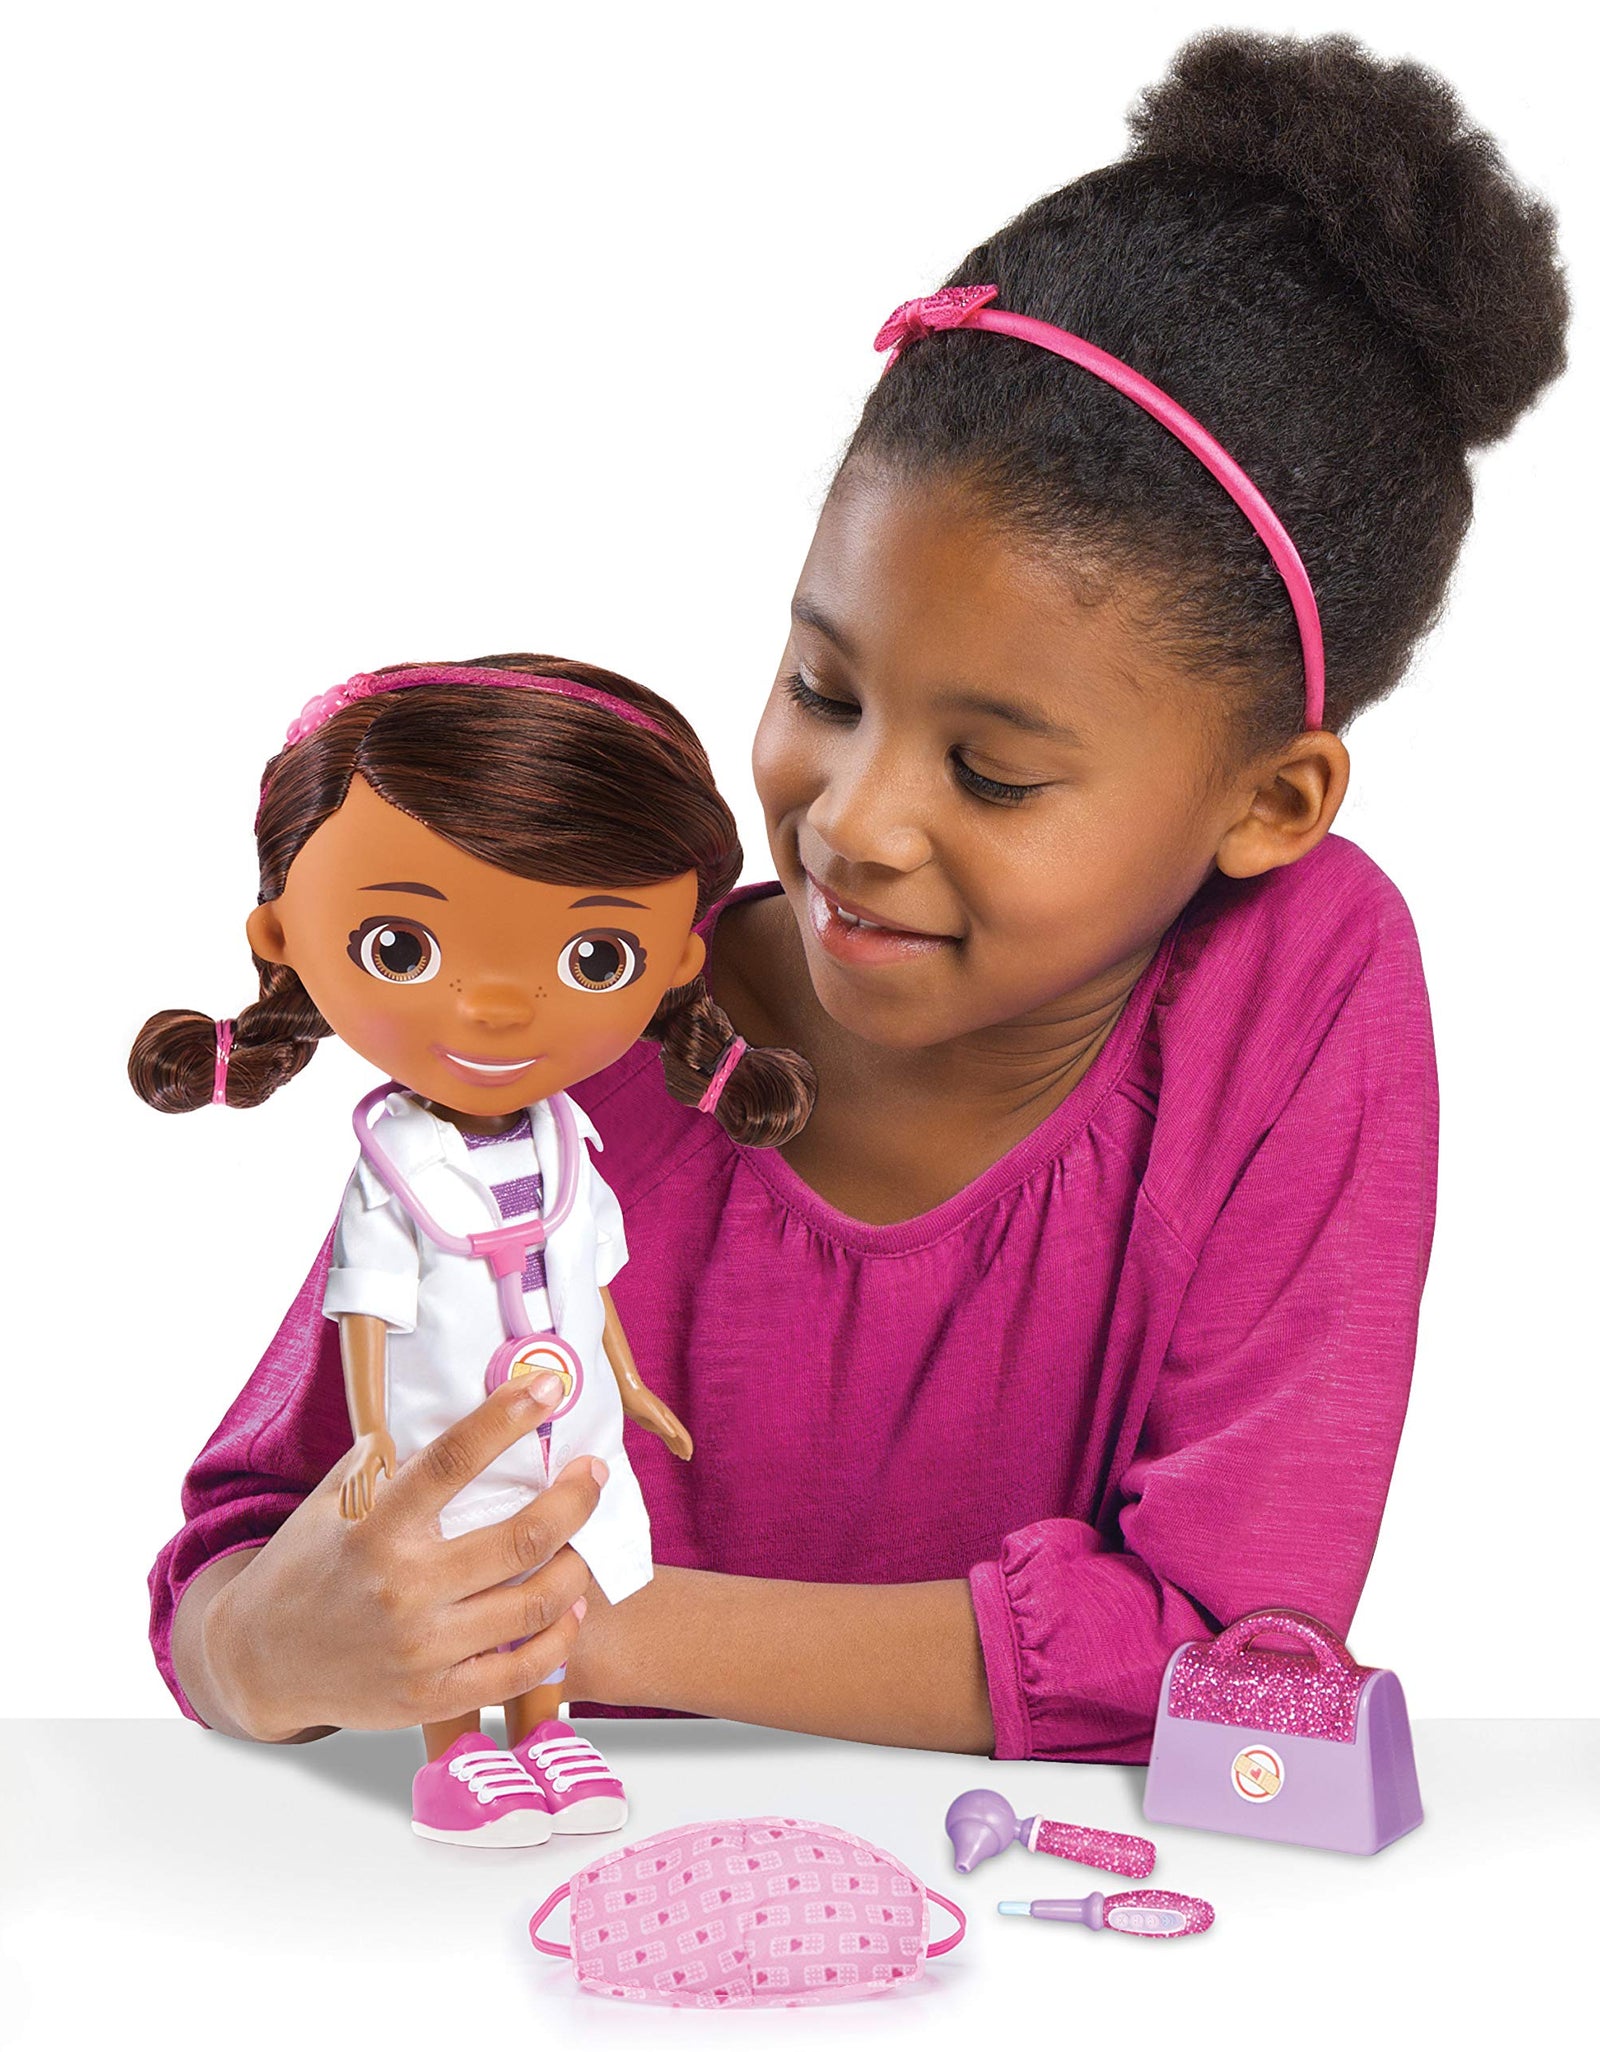 Disney Junior Doc McStuffins Wash Your Hands Singing Doll, With Mask & Accessories, by Just Play